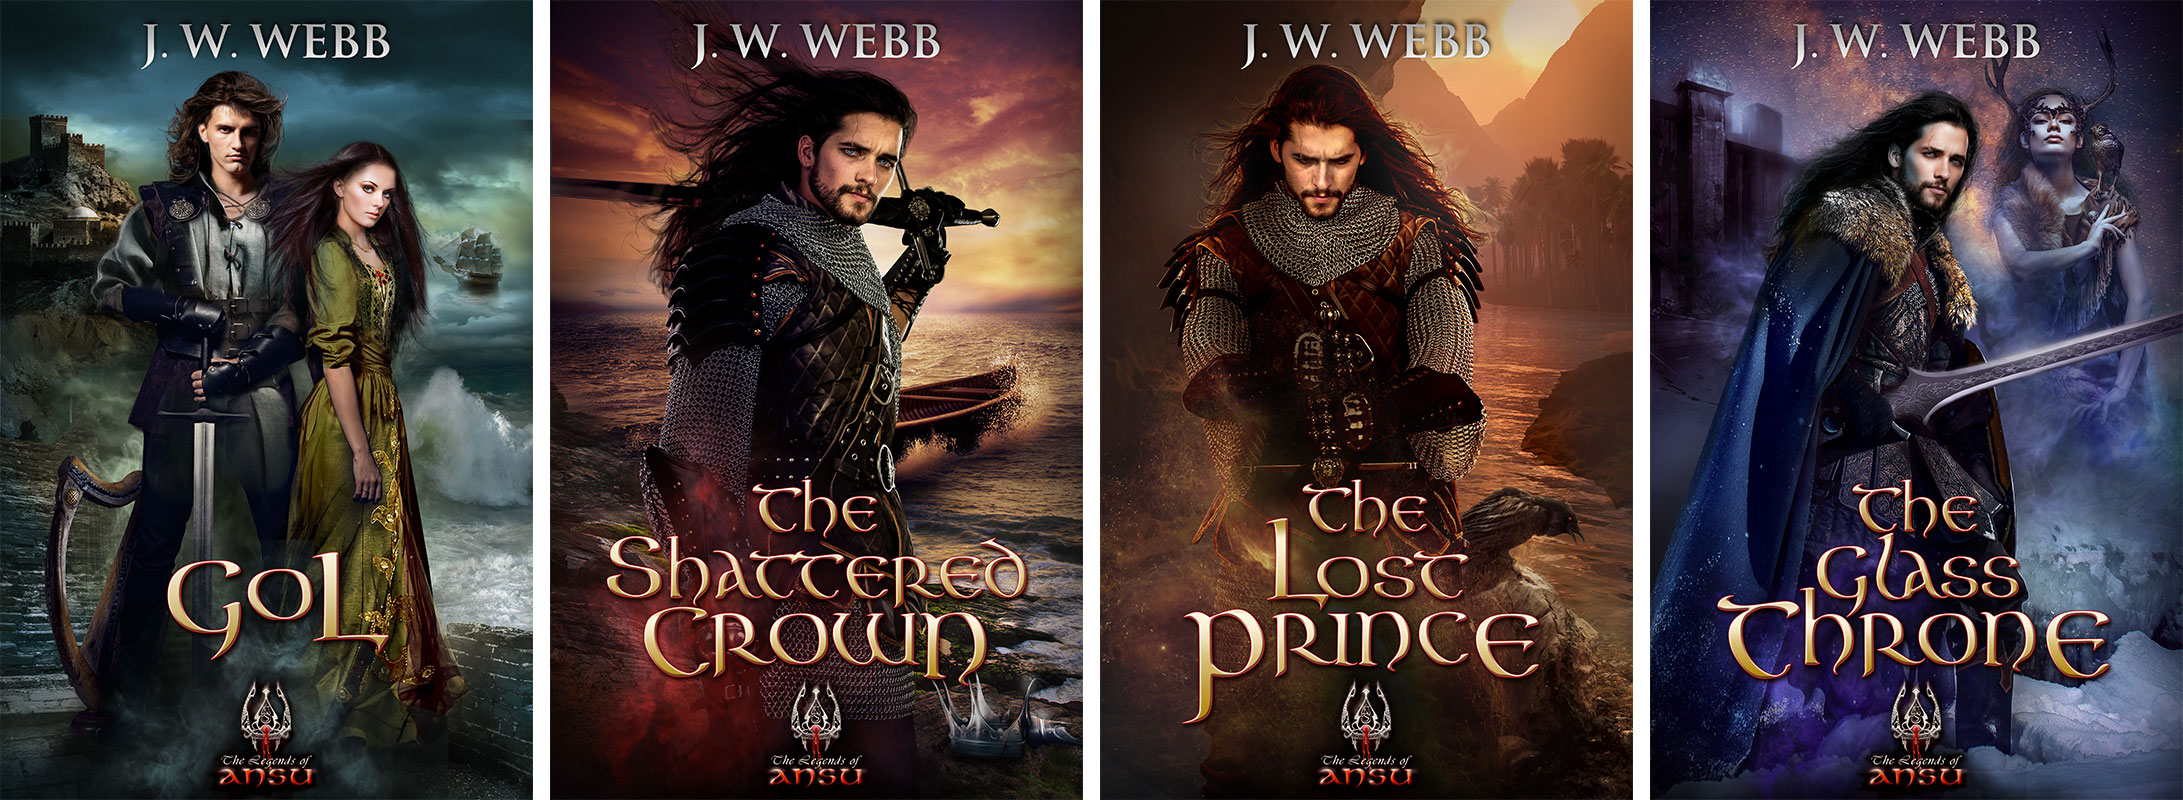 Four books: Gol, The Shattered Crown, The Lost Prince, and The Glass Throne by J. W. Webb